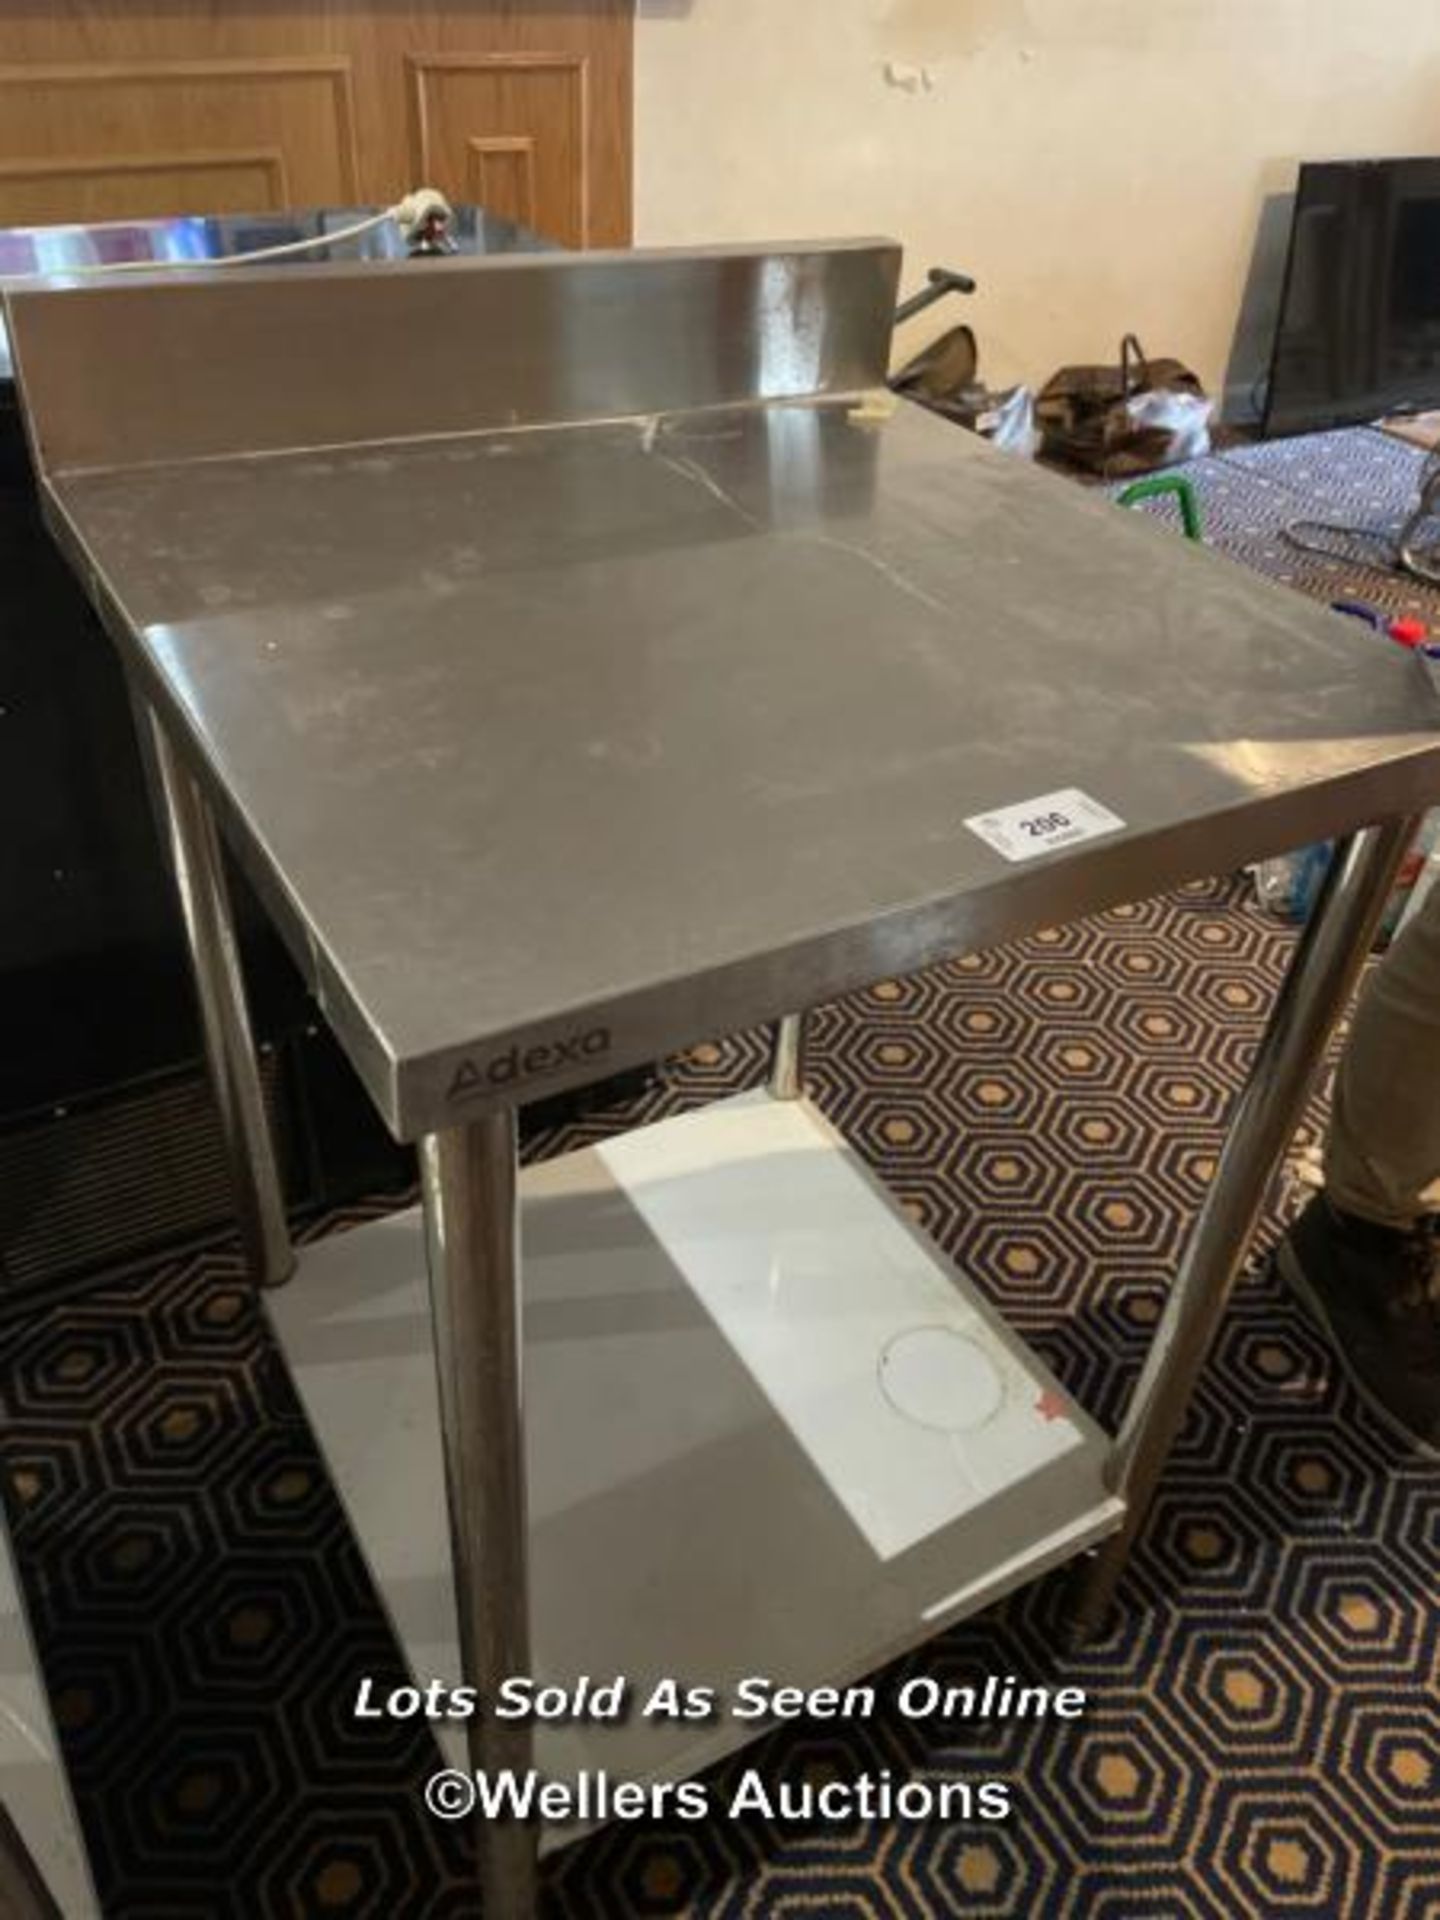 ADEXA TWO TIER STAINLESS STEEL COMMERCIAL KITCHEN WORK BENCH, 99.5CM (H) X 60CM (W) X 60CM (D) / - Image 2 of 3